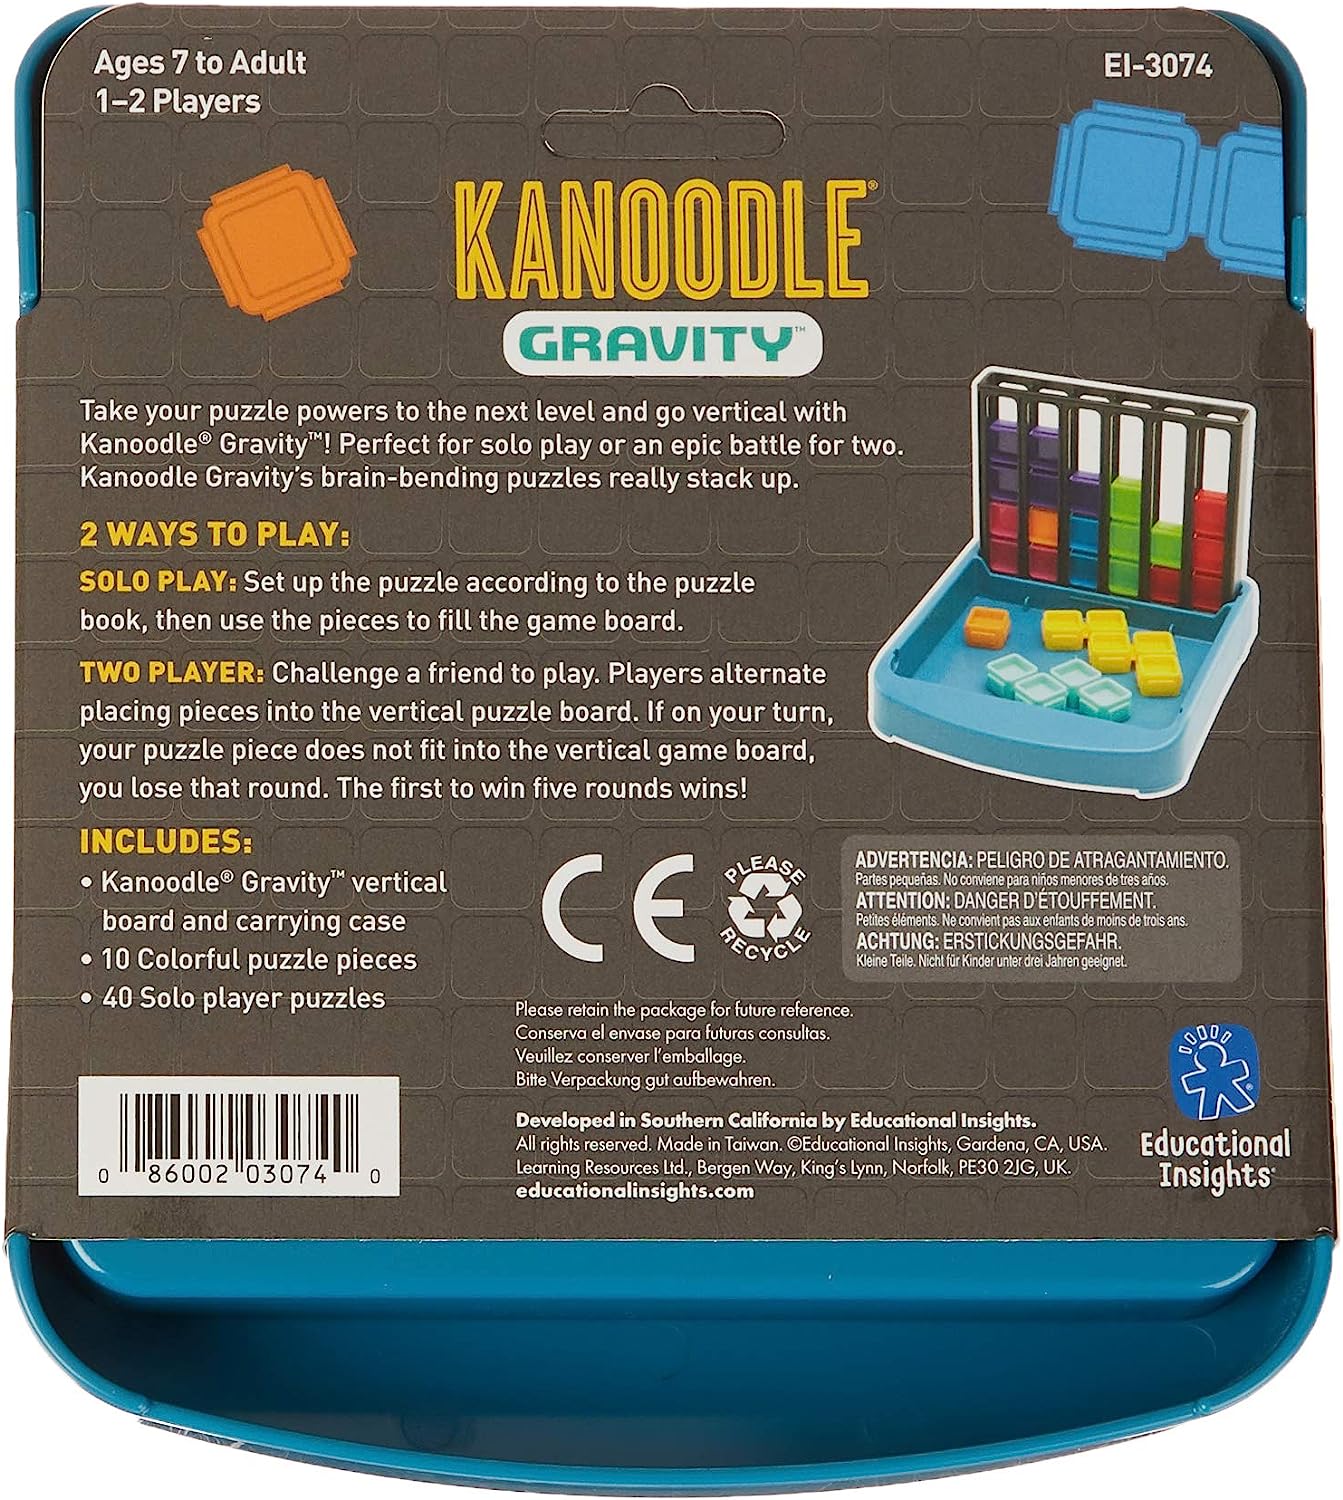 Kanoodle Gravity Classroom Pack of 9, Develops Problem-Solving And Strategic Thinking, Ages 7+